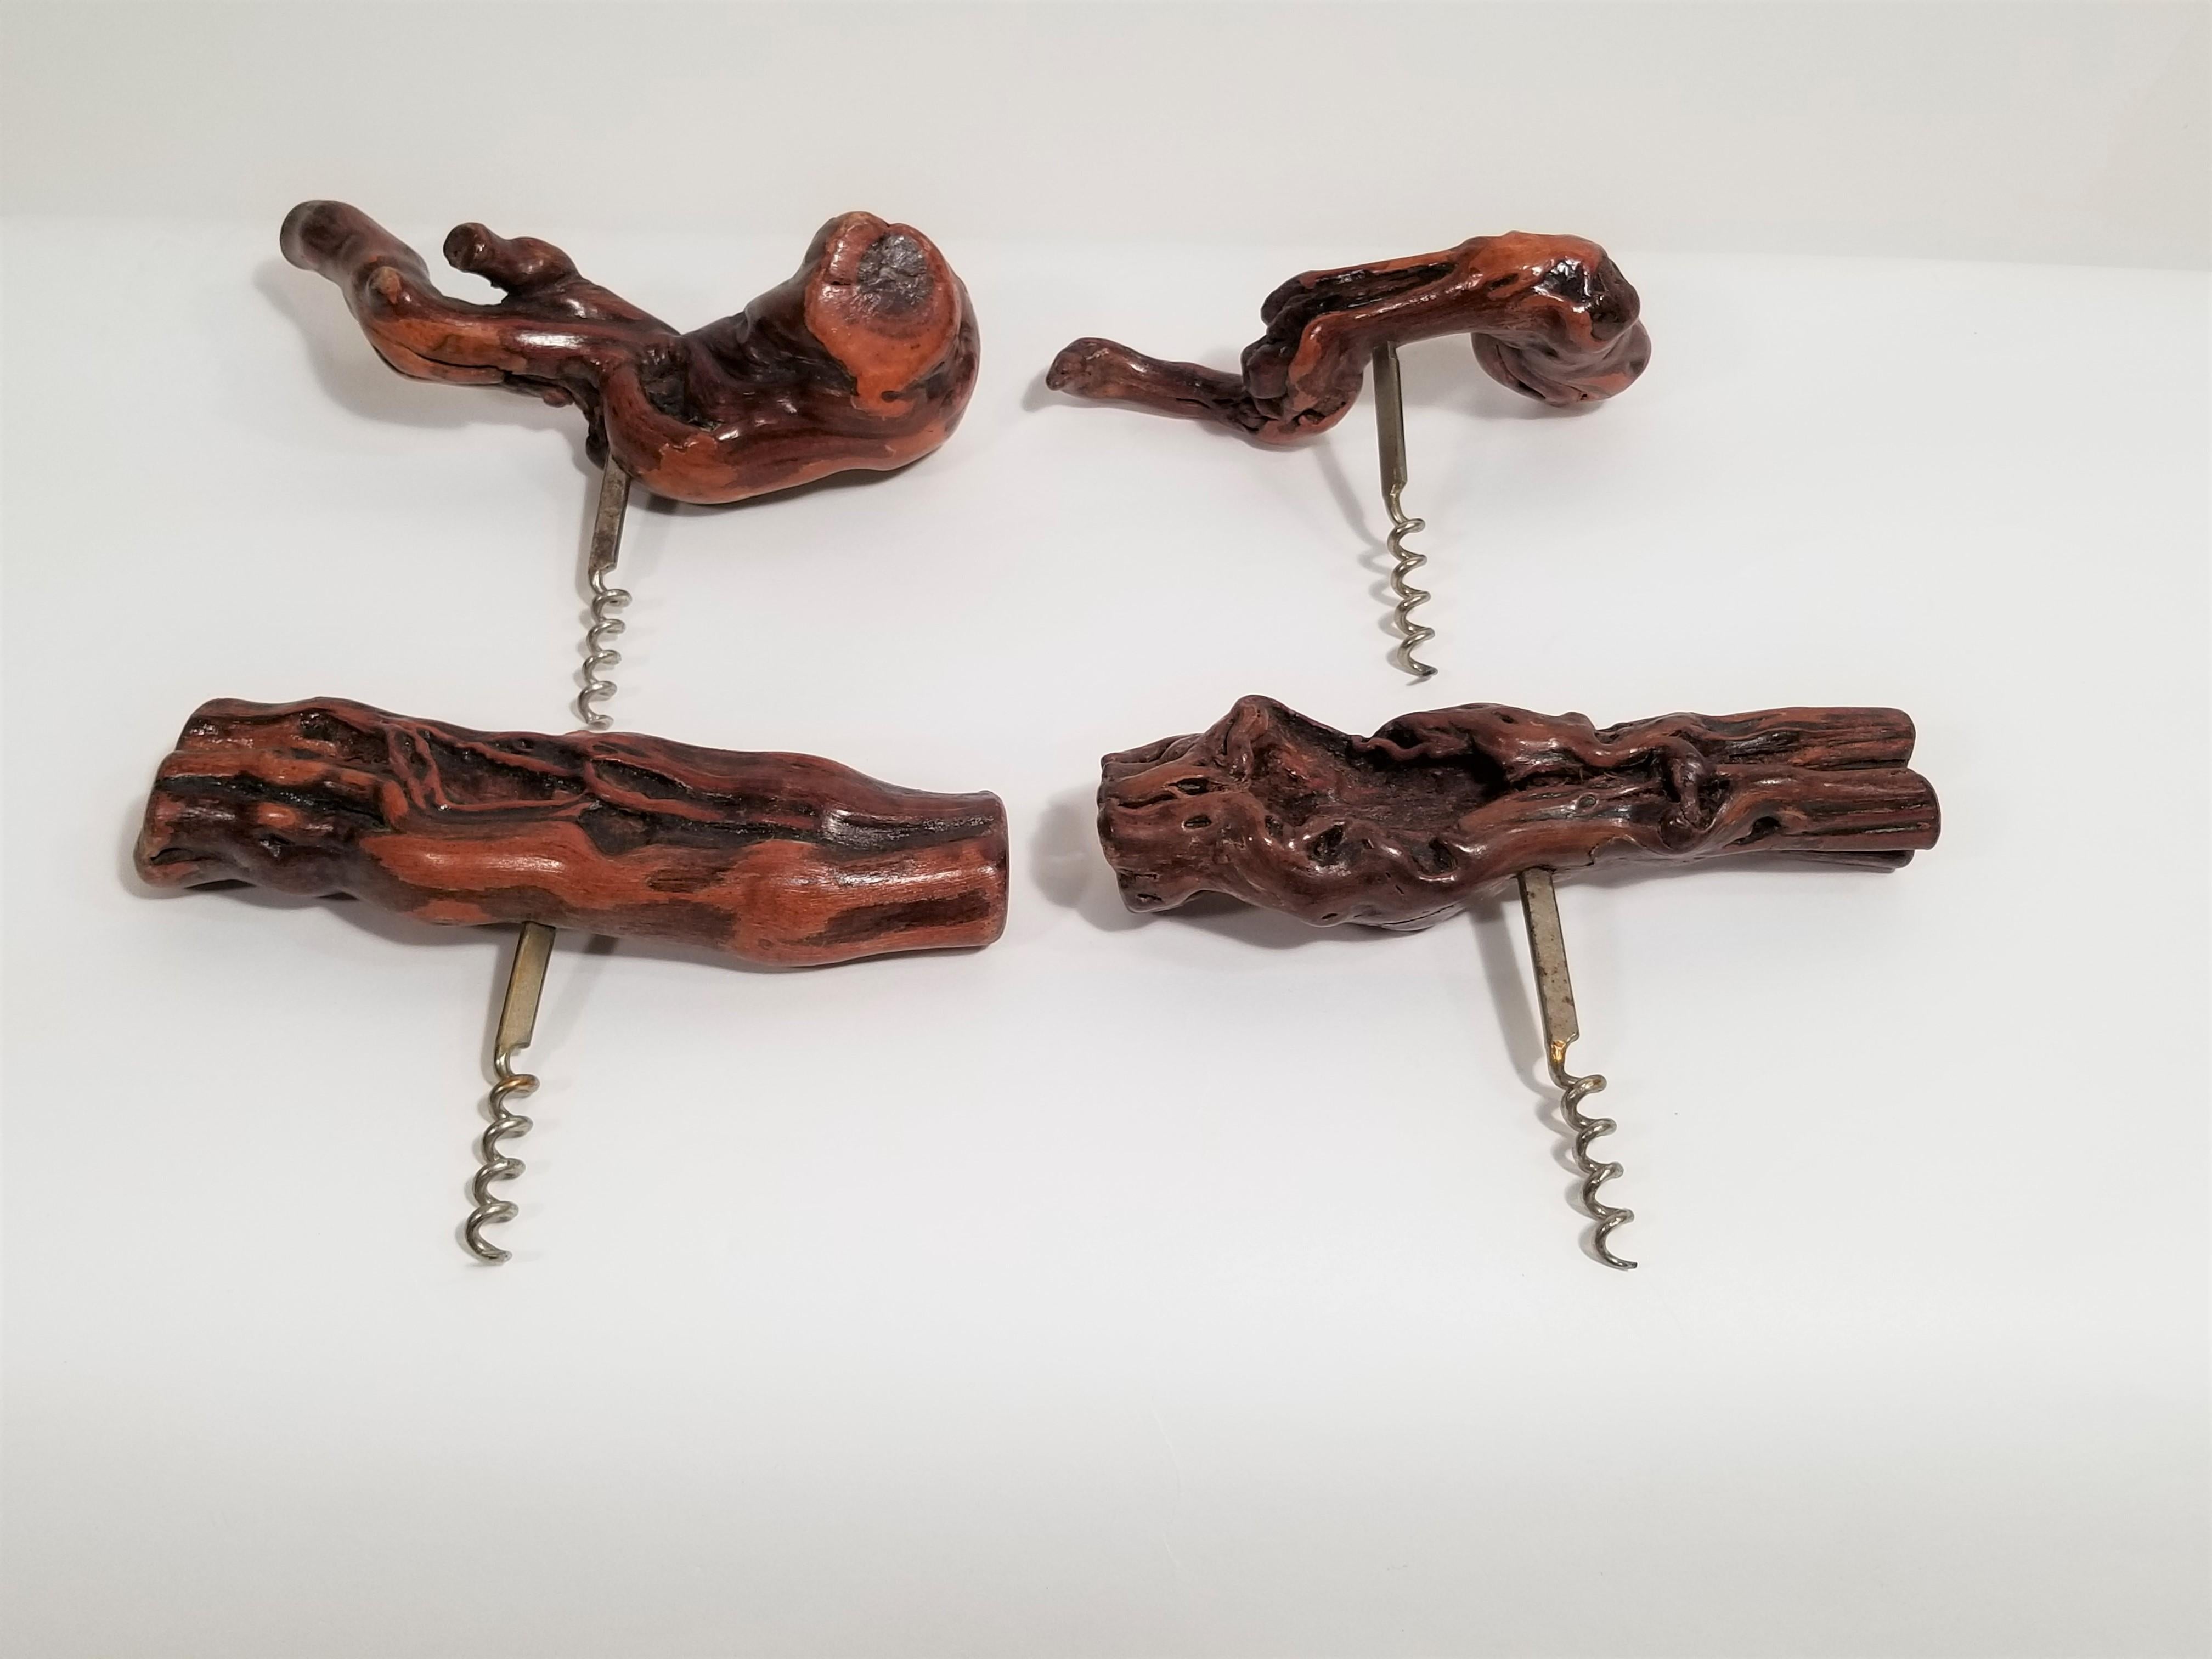 Antique collection of 4 French burl handled corkscrews by Laurent Siret, France.
Beautiful wine openers. Made in France.
Excellent condition.
Complimentary domestic shipping for this item.